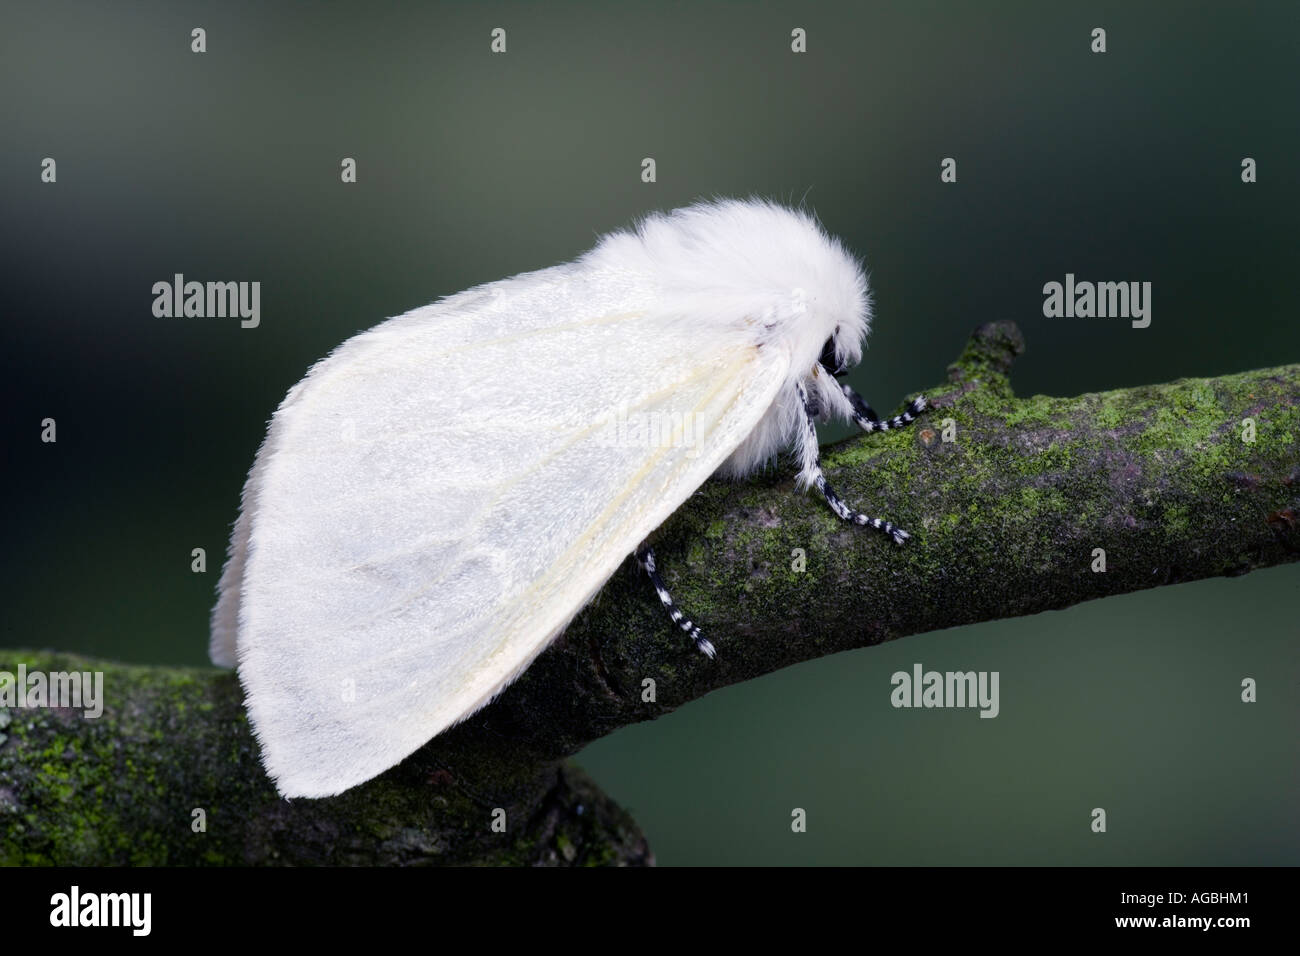 White Satin Moth Leucoma salicis at rest on twig showing markings and detail with out of focus background Potton Bedfordshire Stock Photo